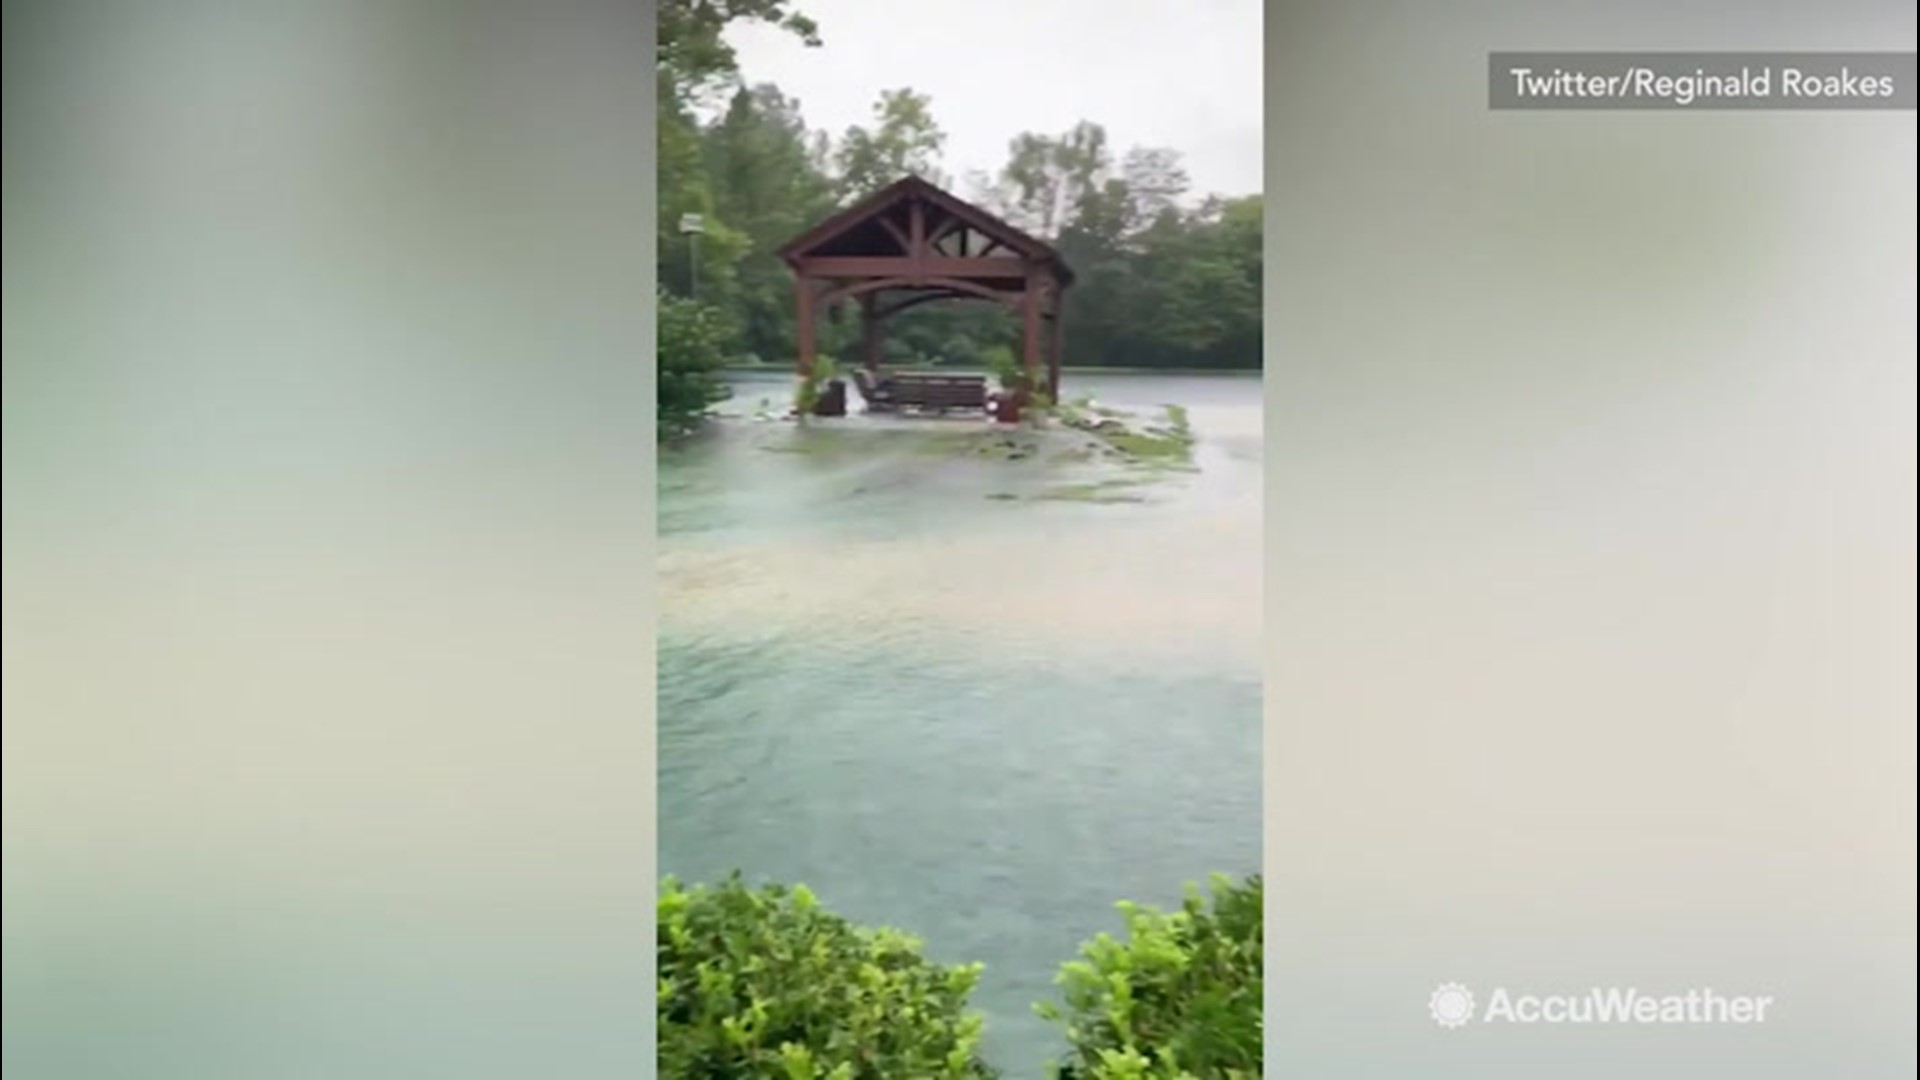 In this video, you can see a relaxing area drowned by flooding on July 16, in Gilted Edge, Tennesse. The National Weather Service in Memphis has issued an urban and small stream flood advisory for the area.